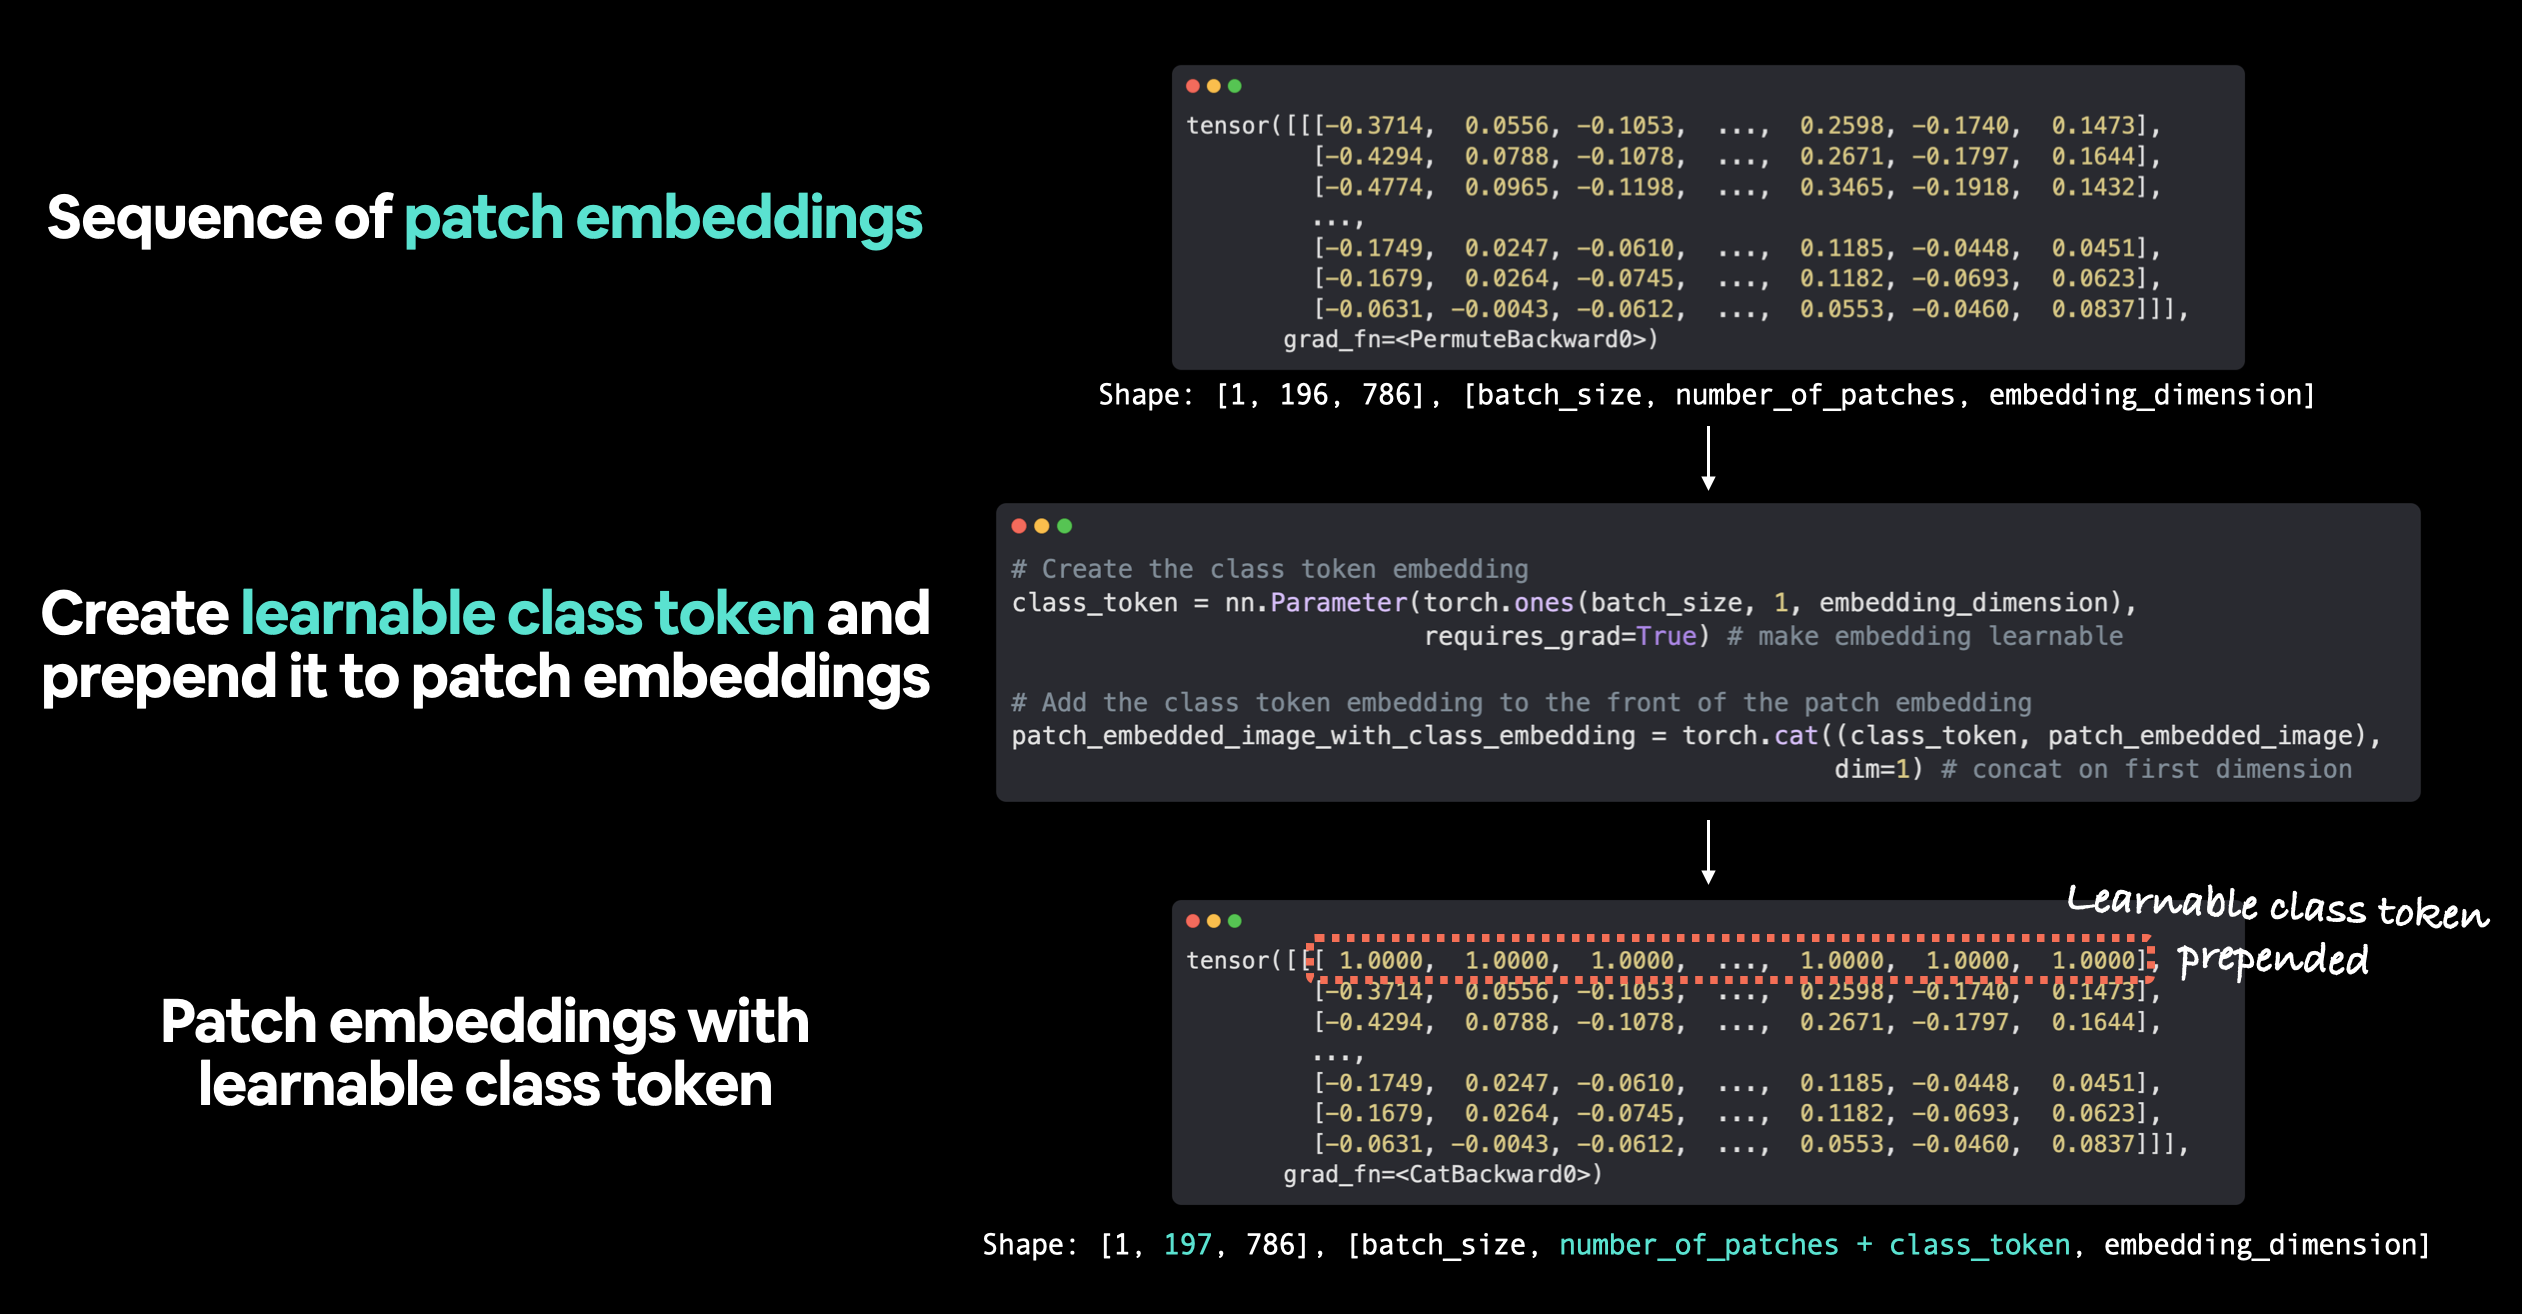 going from a sequence of patch embeddings, creating a learnable class token and then prepending it to the patch embeddings